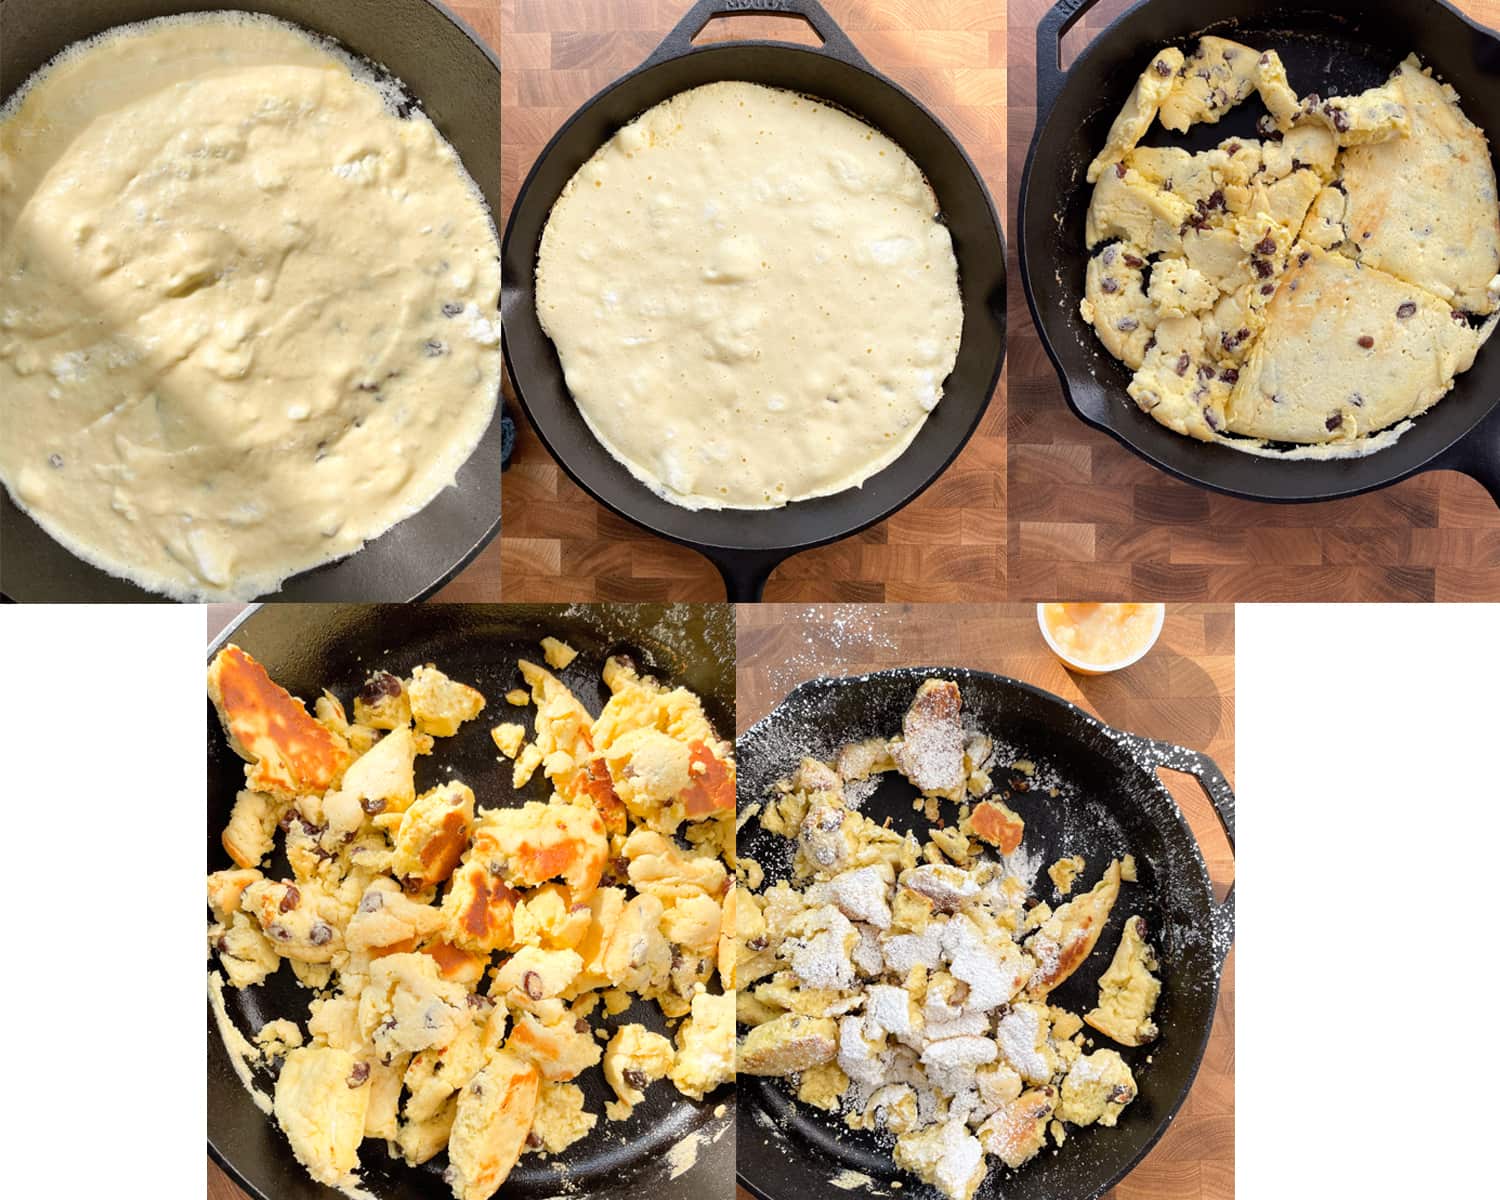 Process of cooking and tearing up kaiserschmarrn. 